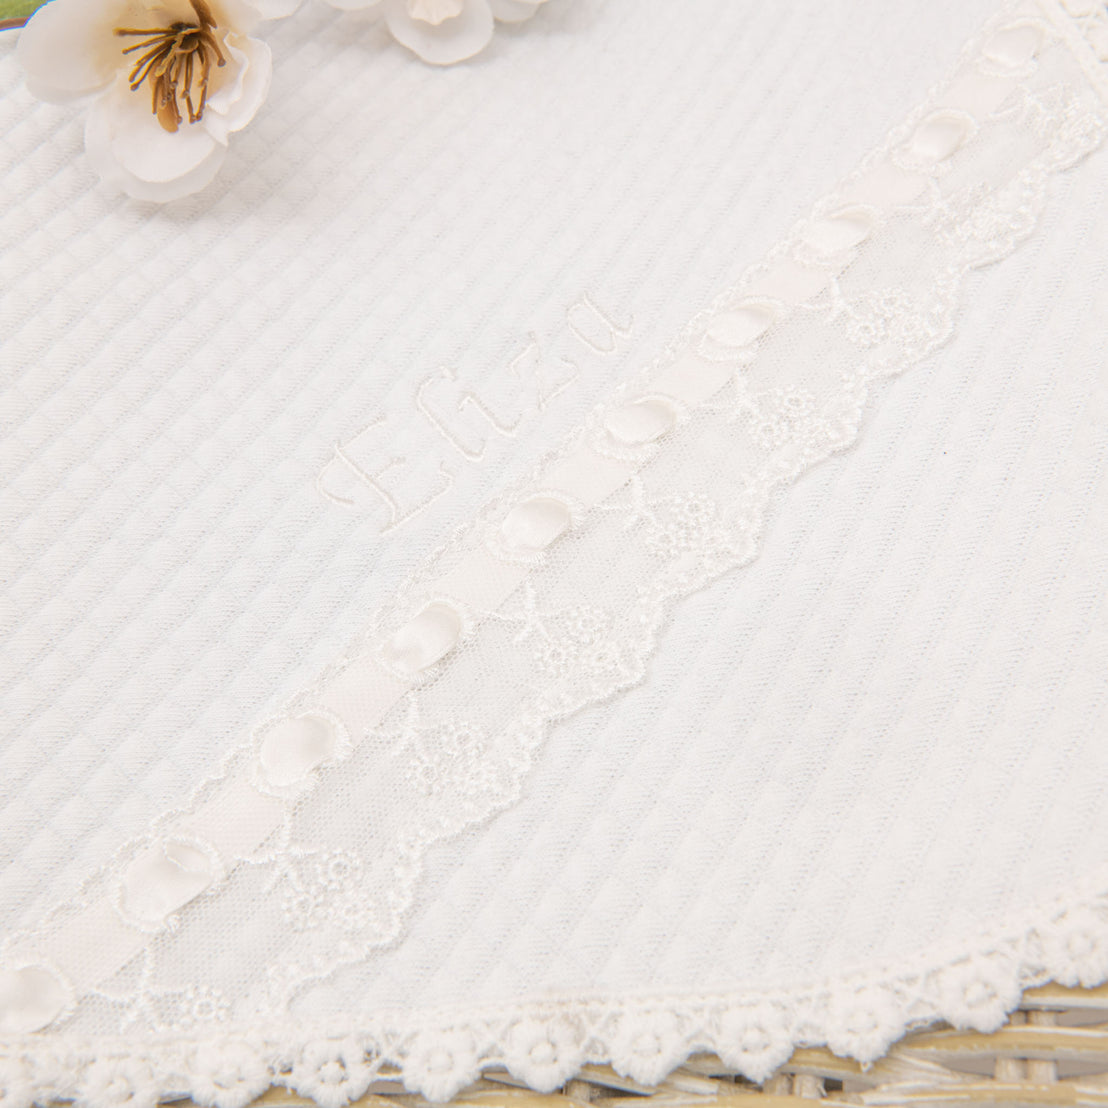 Close-up of a textured Eliza Personalized Blanket with an embroidered design and lace detailing, suitable for a baptism.